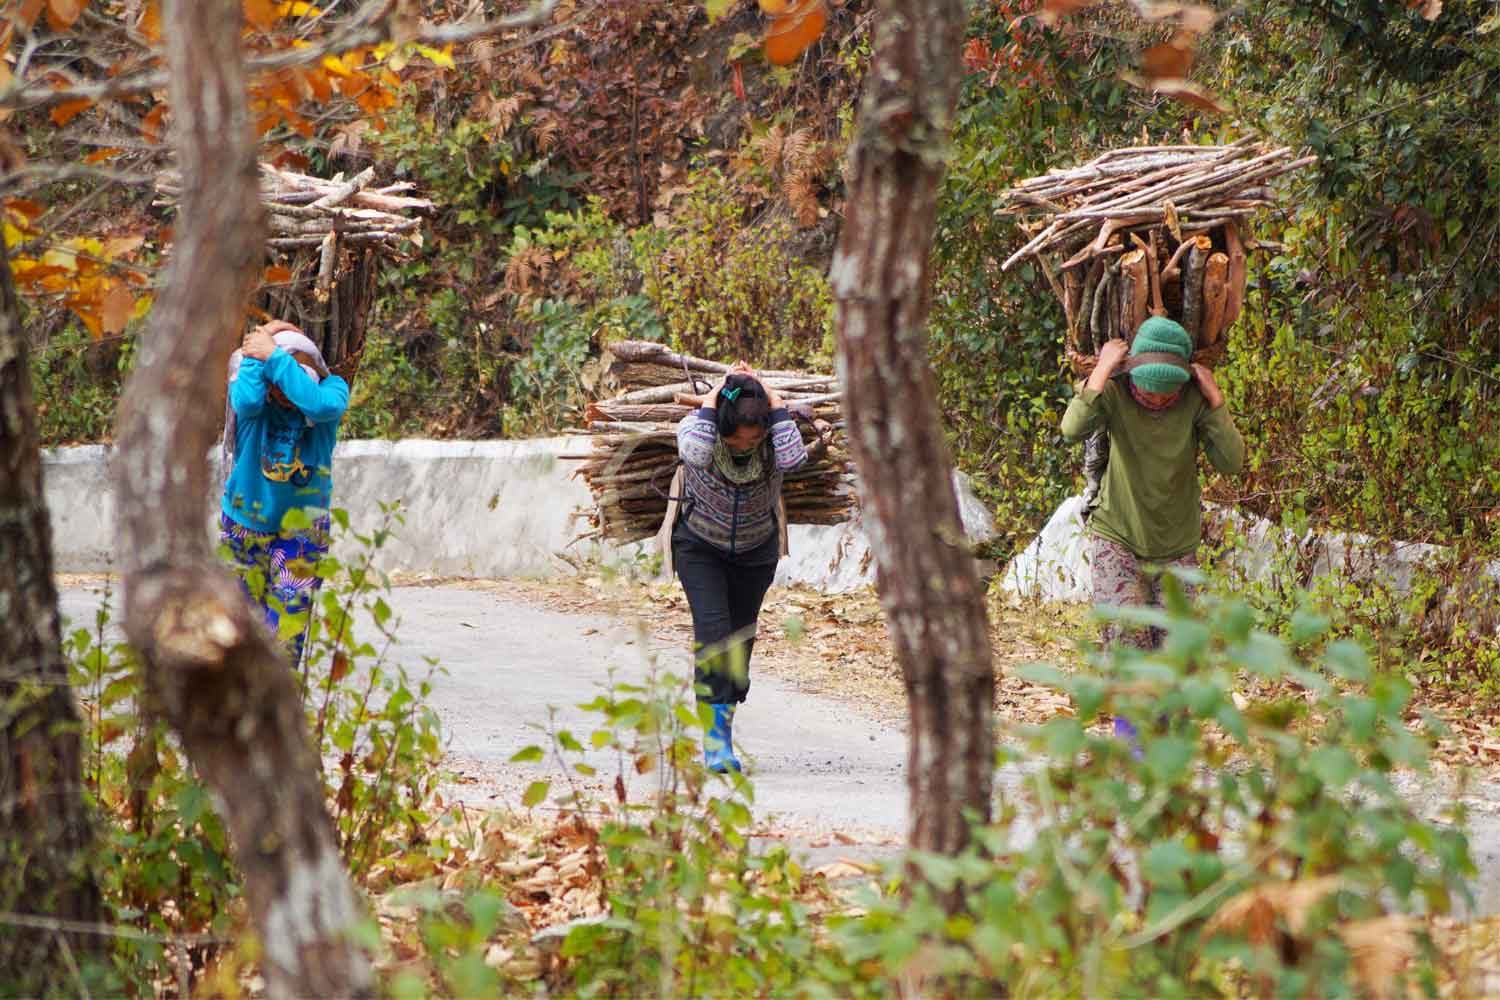 Women collecting firewood